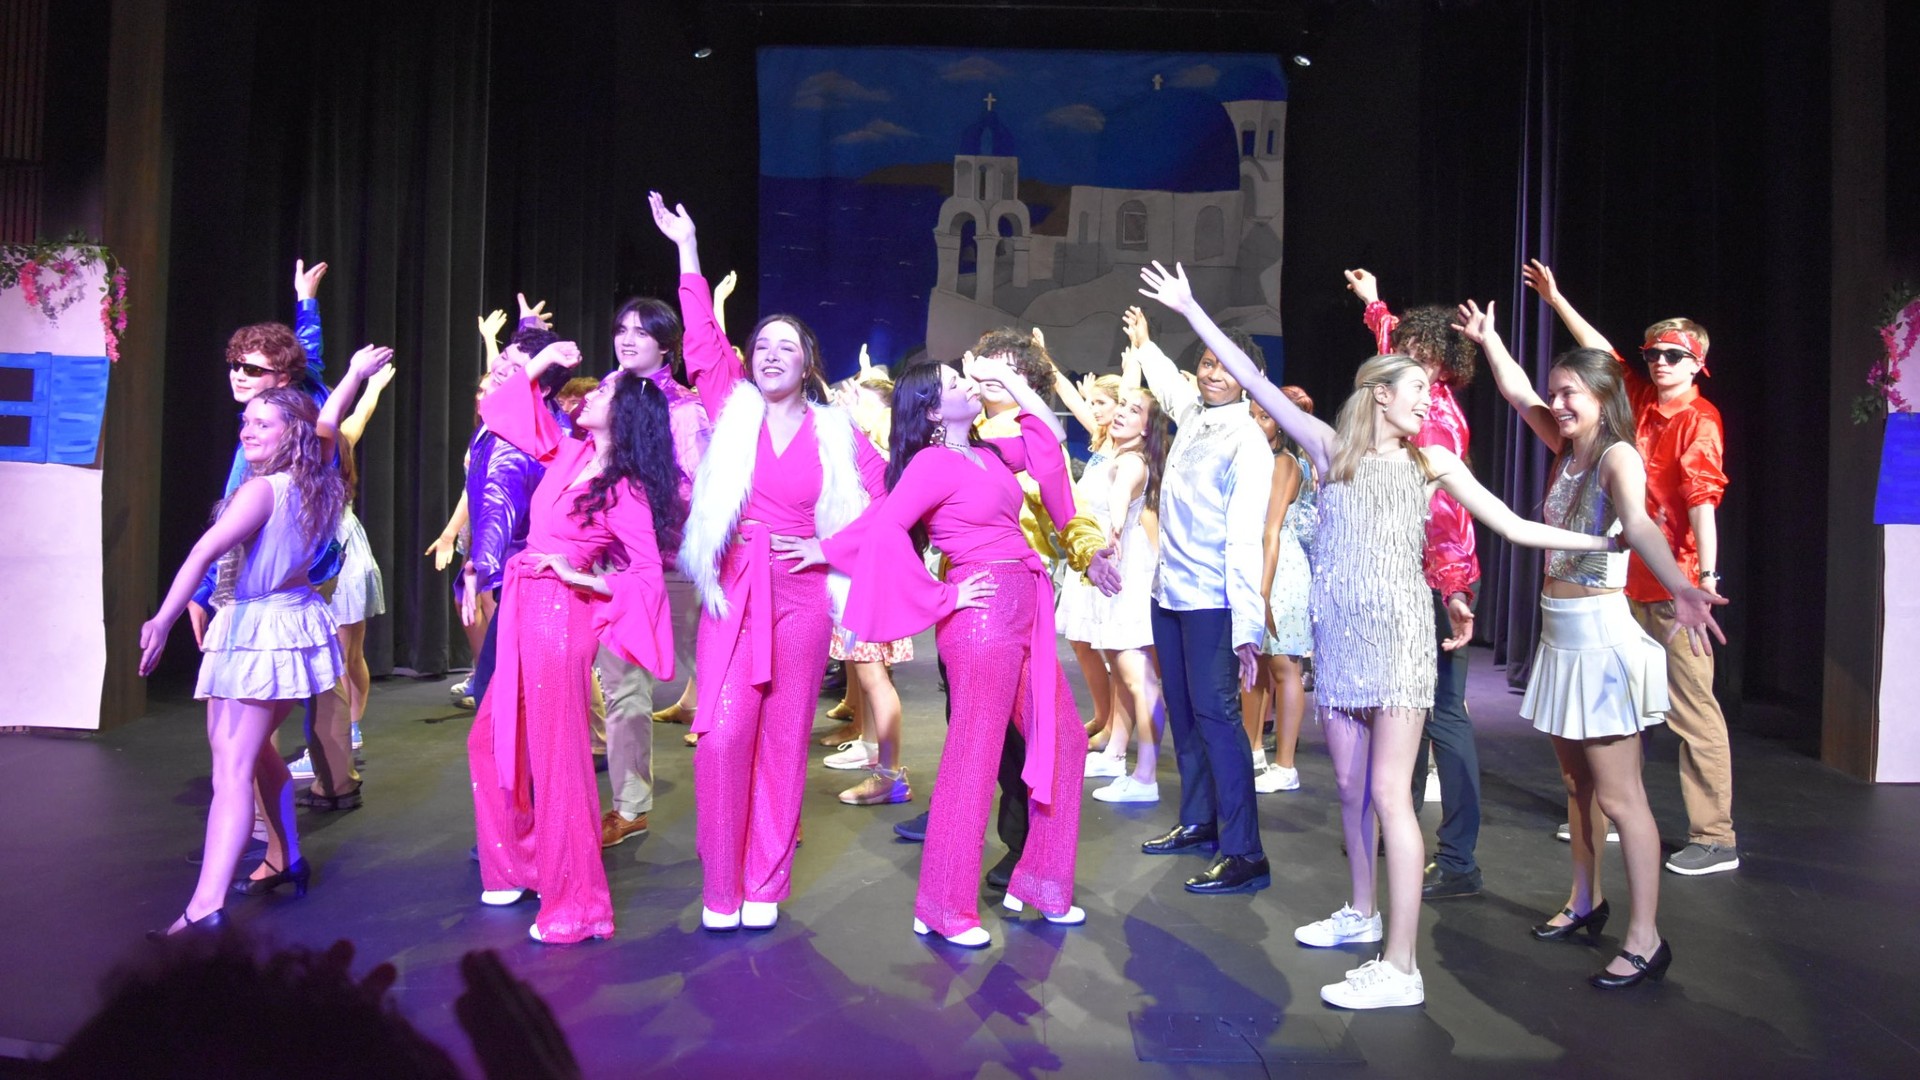 private high schools near syracuse ny image of cba students singing and dancing with friends in the high school musical